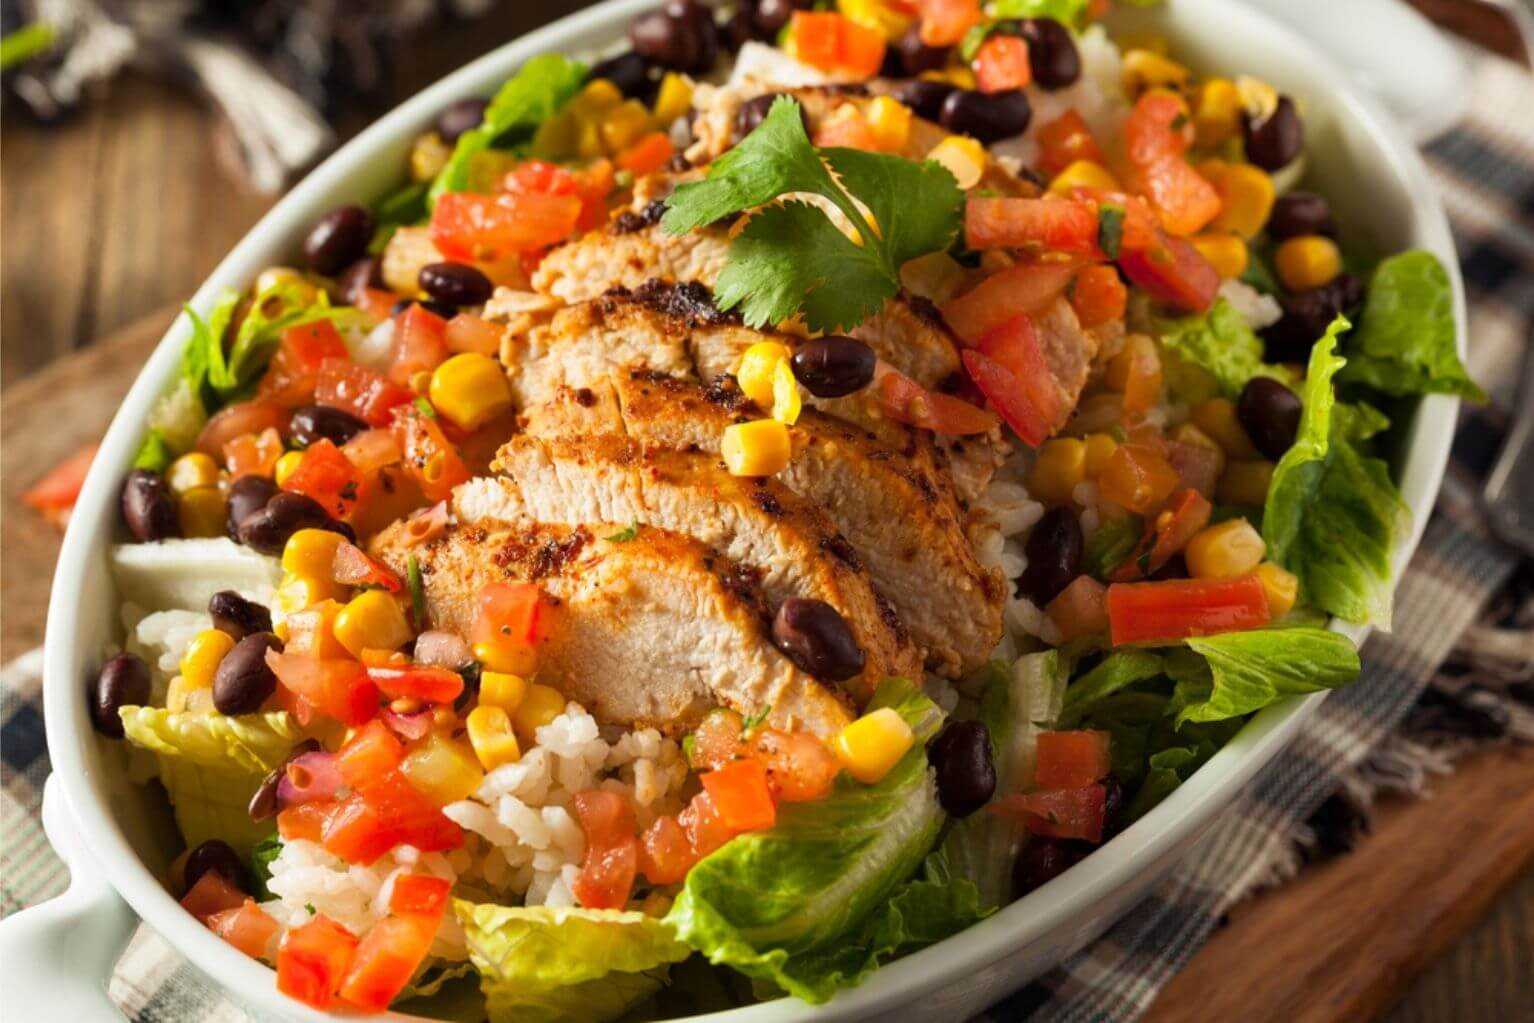 Aerial view of a burrito bowl from Chipotle with chicken, tomatoes, lettuce, black beans, and cilantro.